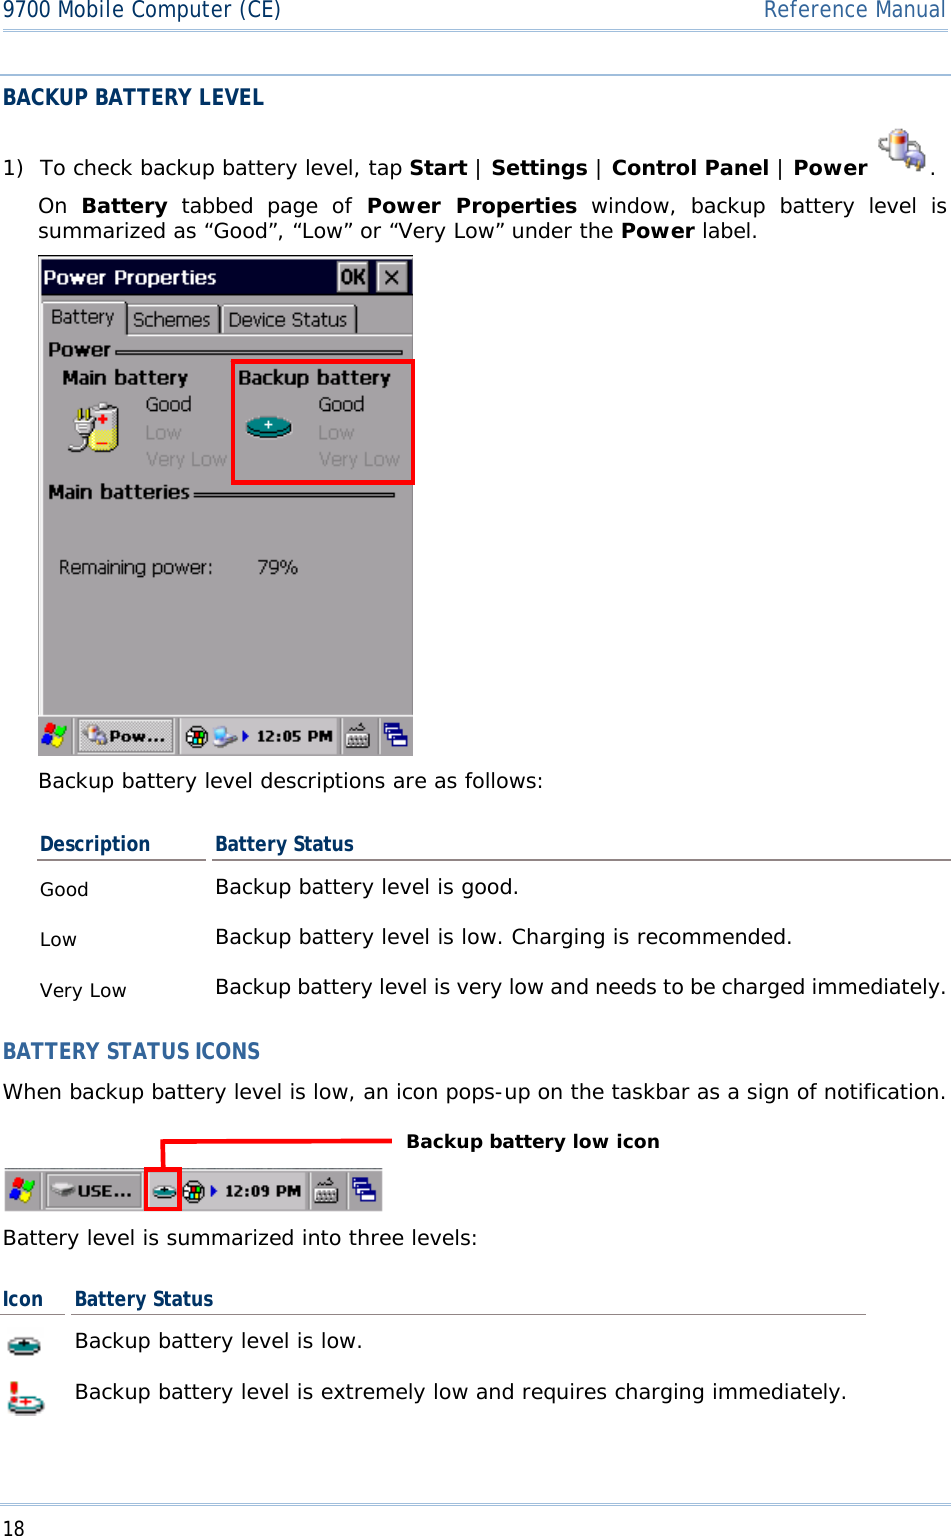 189700 Mobile Computer (CE)  Reference ManualBACKUP BATTERY LEVEL 1) To check backup battery level, tap Start |Settings | Control Panel |Power .On Battery tabbed page of Power Properties window, backup battery level is summarized as “Good”, “Low” or “Very Low” under the Power label. Backup battery level descriptions are as follows: Description Battery Status Good Backup battery level is good. Low Backup battery level is low. Charging is recommended. Very Low  Backup battery level is very low and needs to be charged immediately.BATTERY STATUS ICONS When backup battery level is low, an icon pops-up on the taskbar as a sign of notification. Battery level is summarized into three levels: Icon  Battery Status Backup battery level is low. Backup battery level is extremely low and requires charging immediately. Backup battery low icon